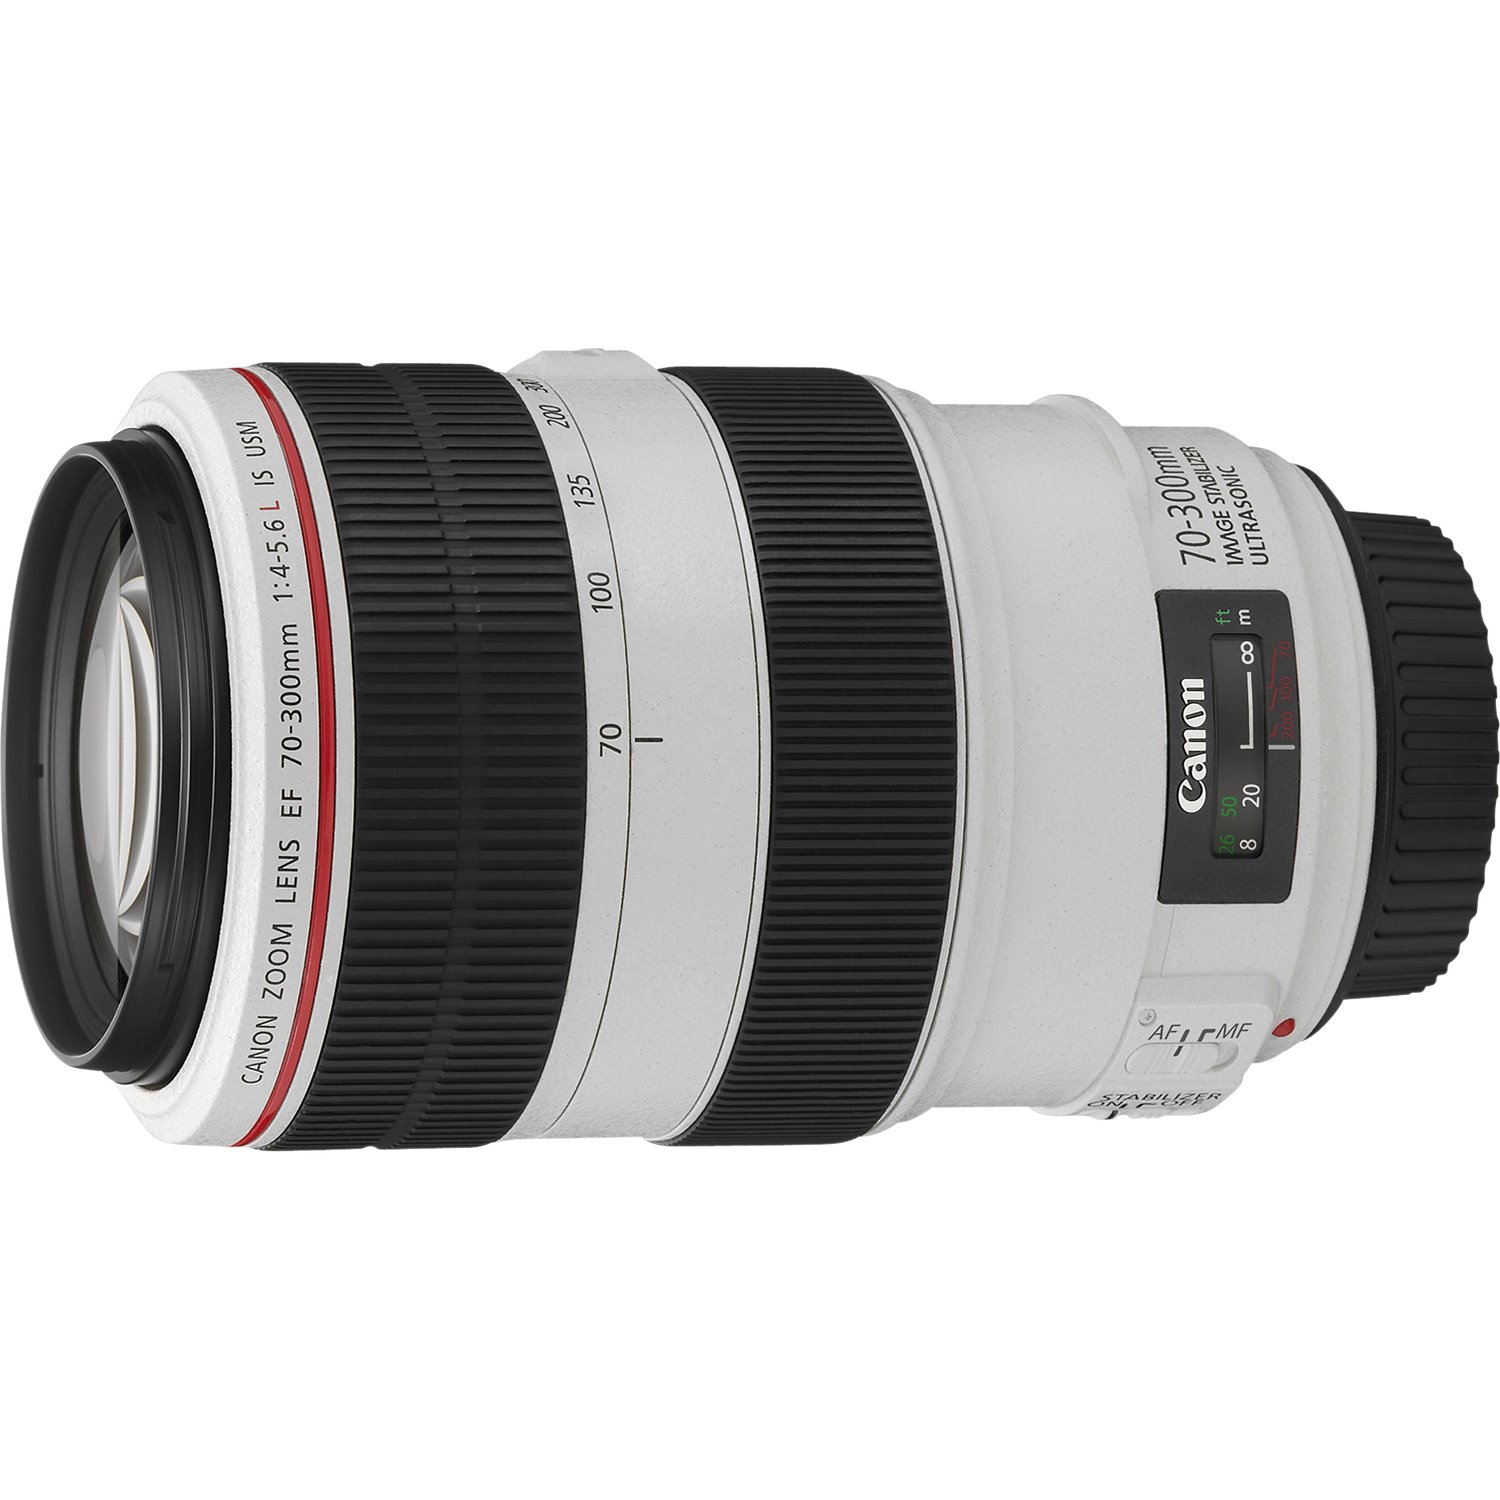 Canon - 70 mm to 300 mm - f/5.6 - Telephoto Zoom Lens for Canon EF/EF-S